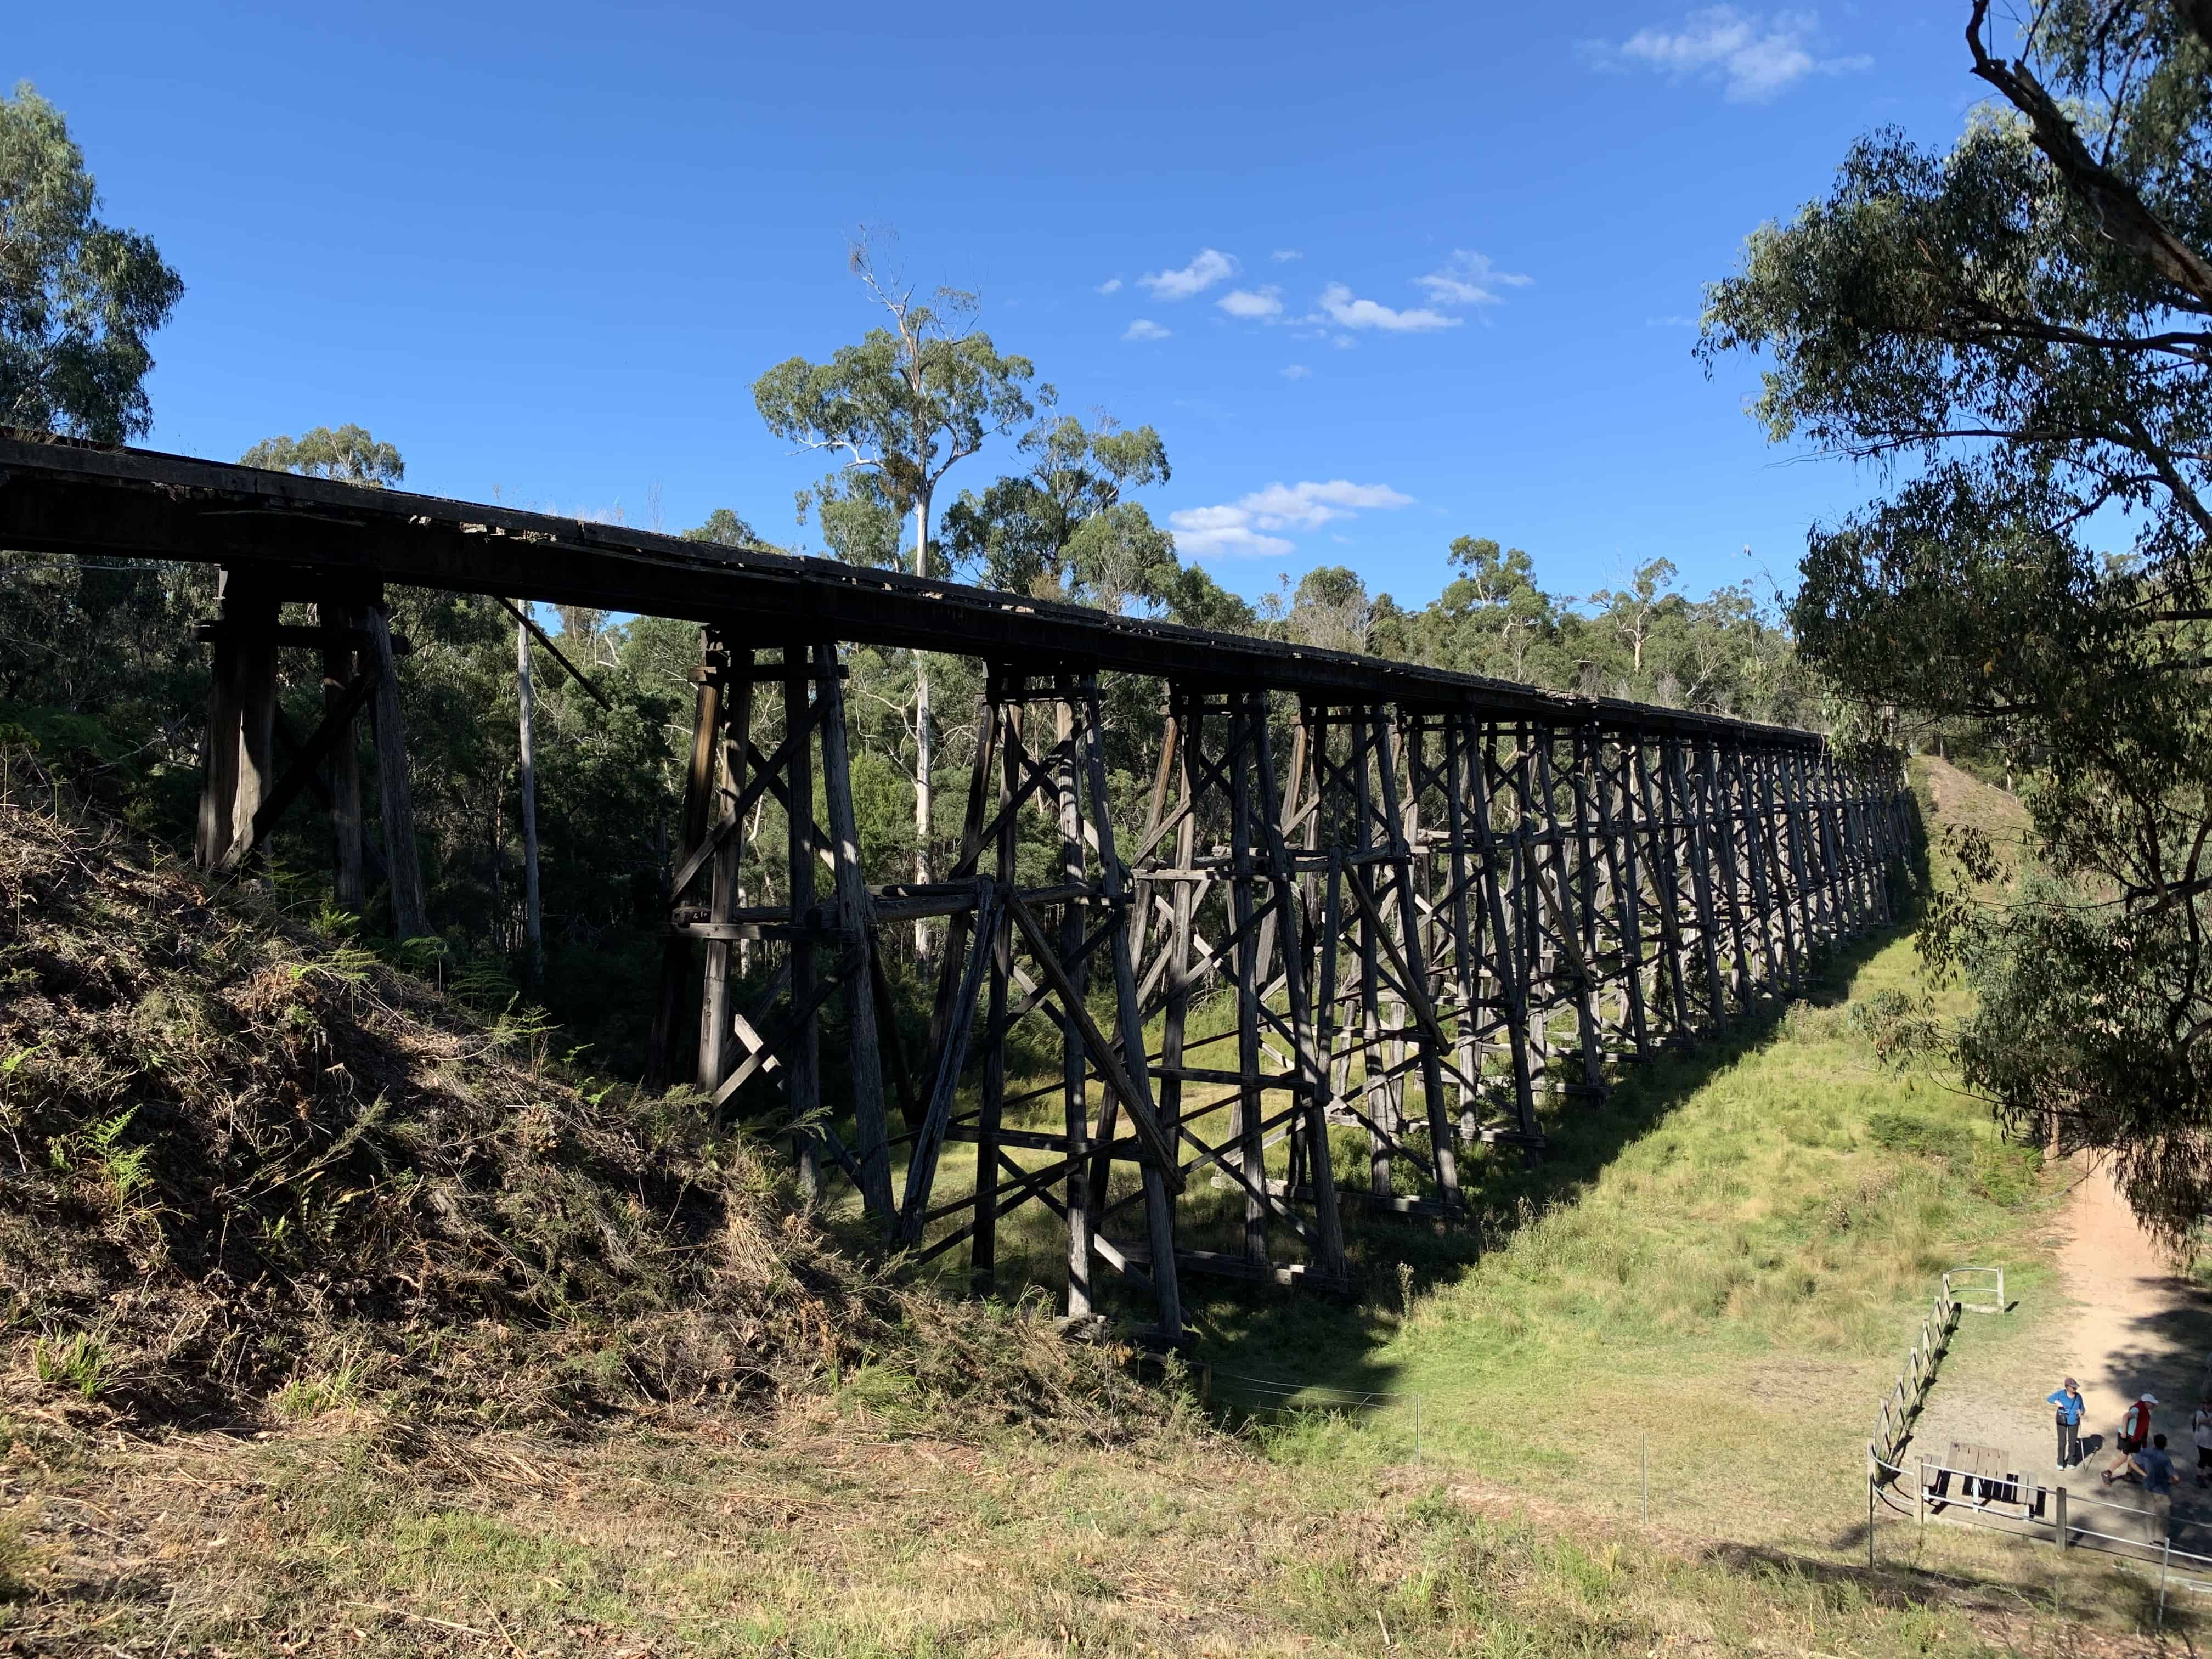 East Gippsland Guided Walking Holiday - March 2021